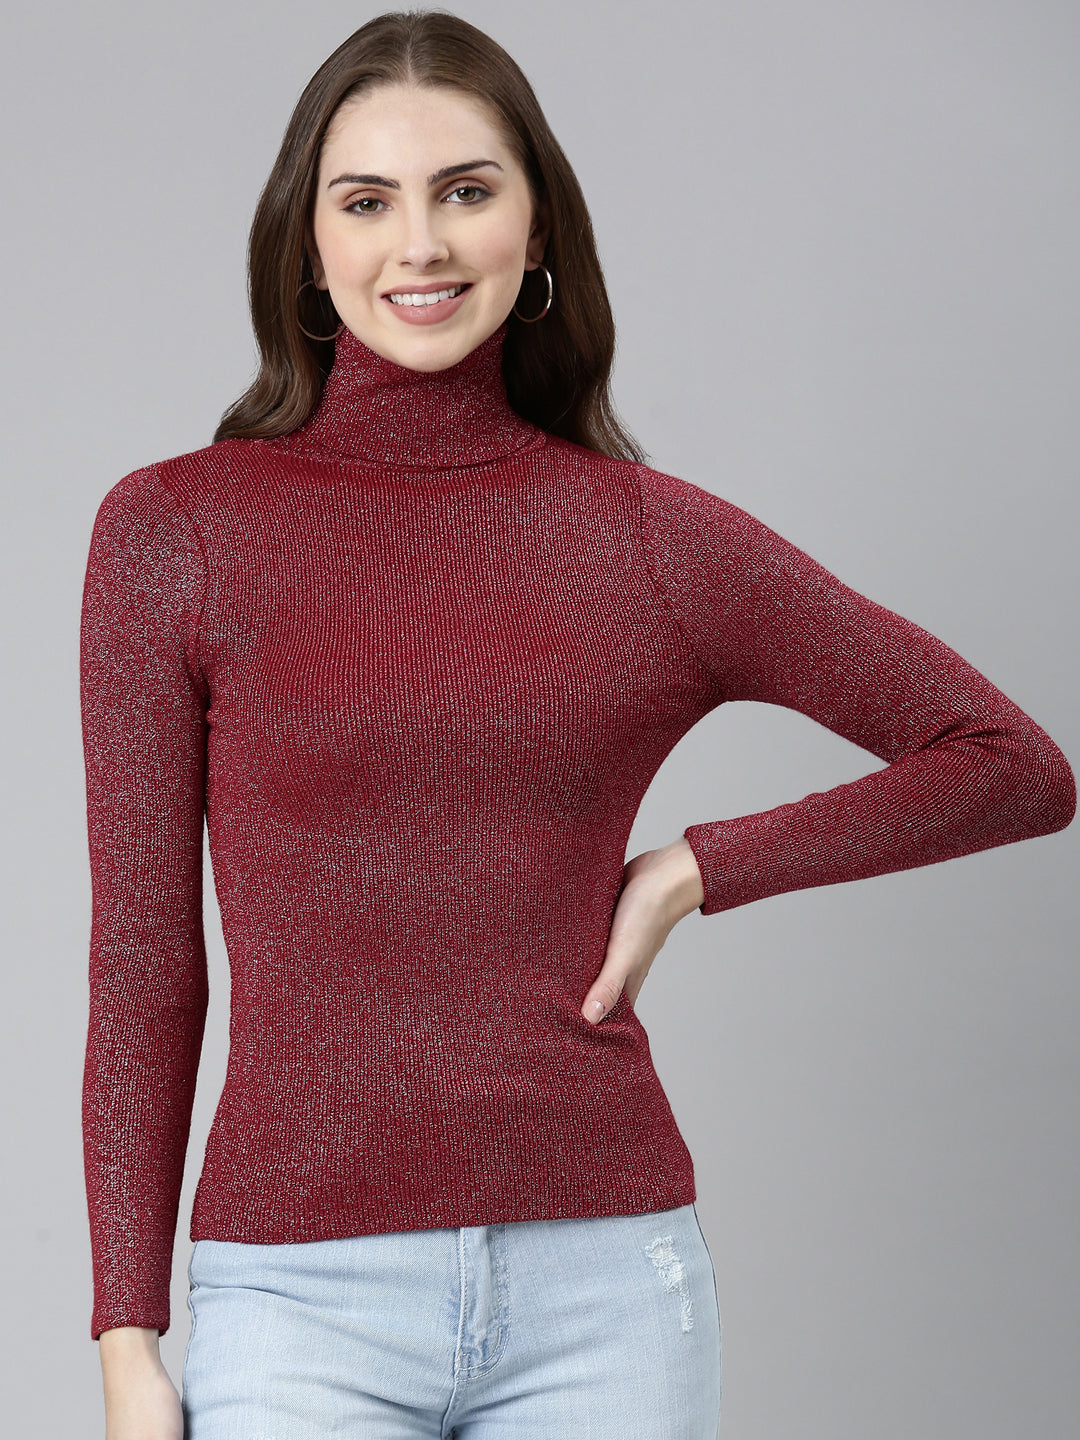 High Neck Embellished Regular Sleeves Fitted Maroon Top